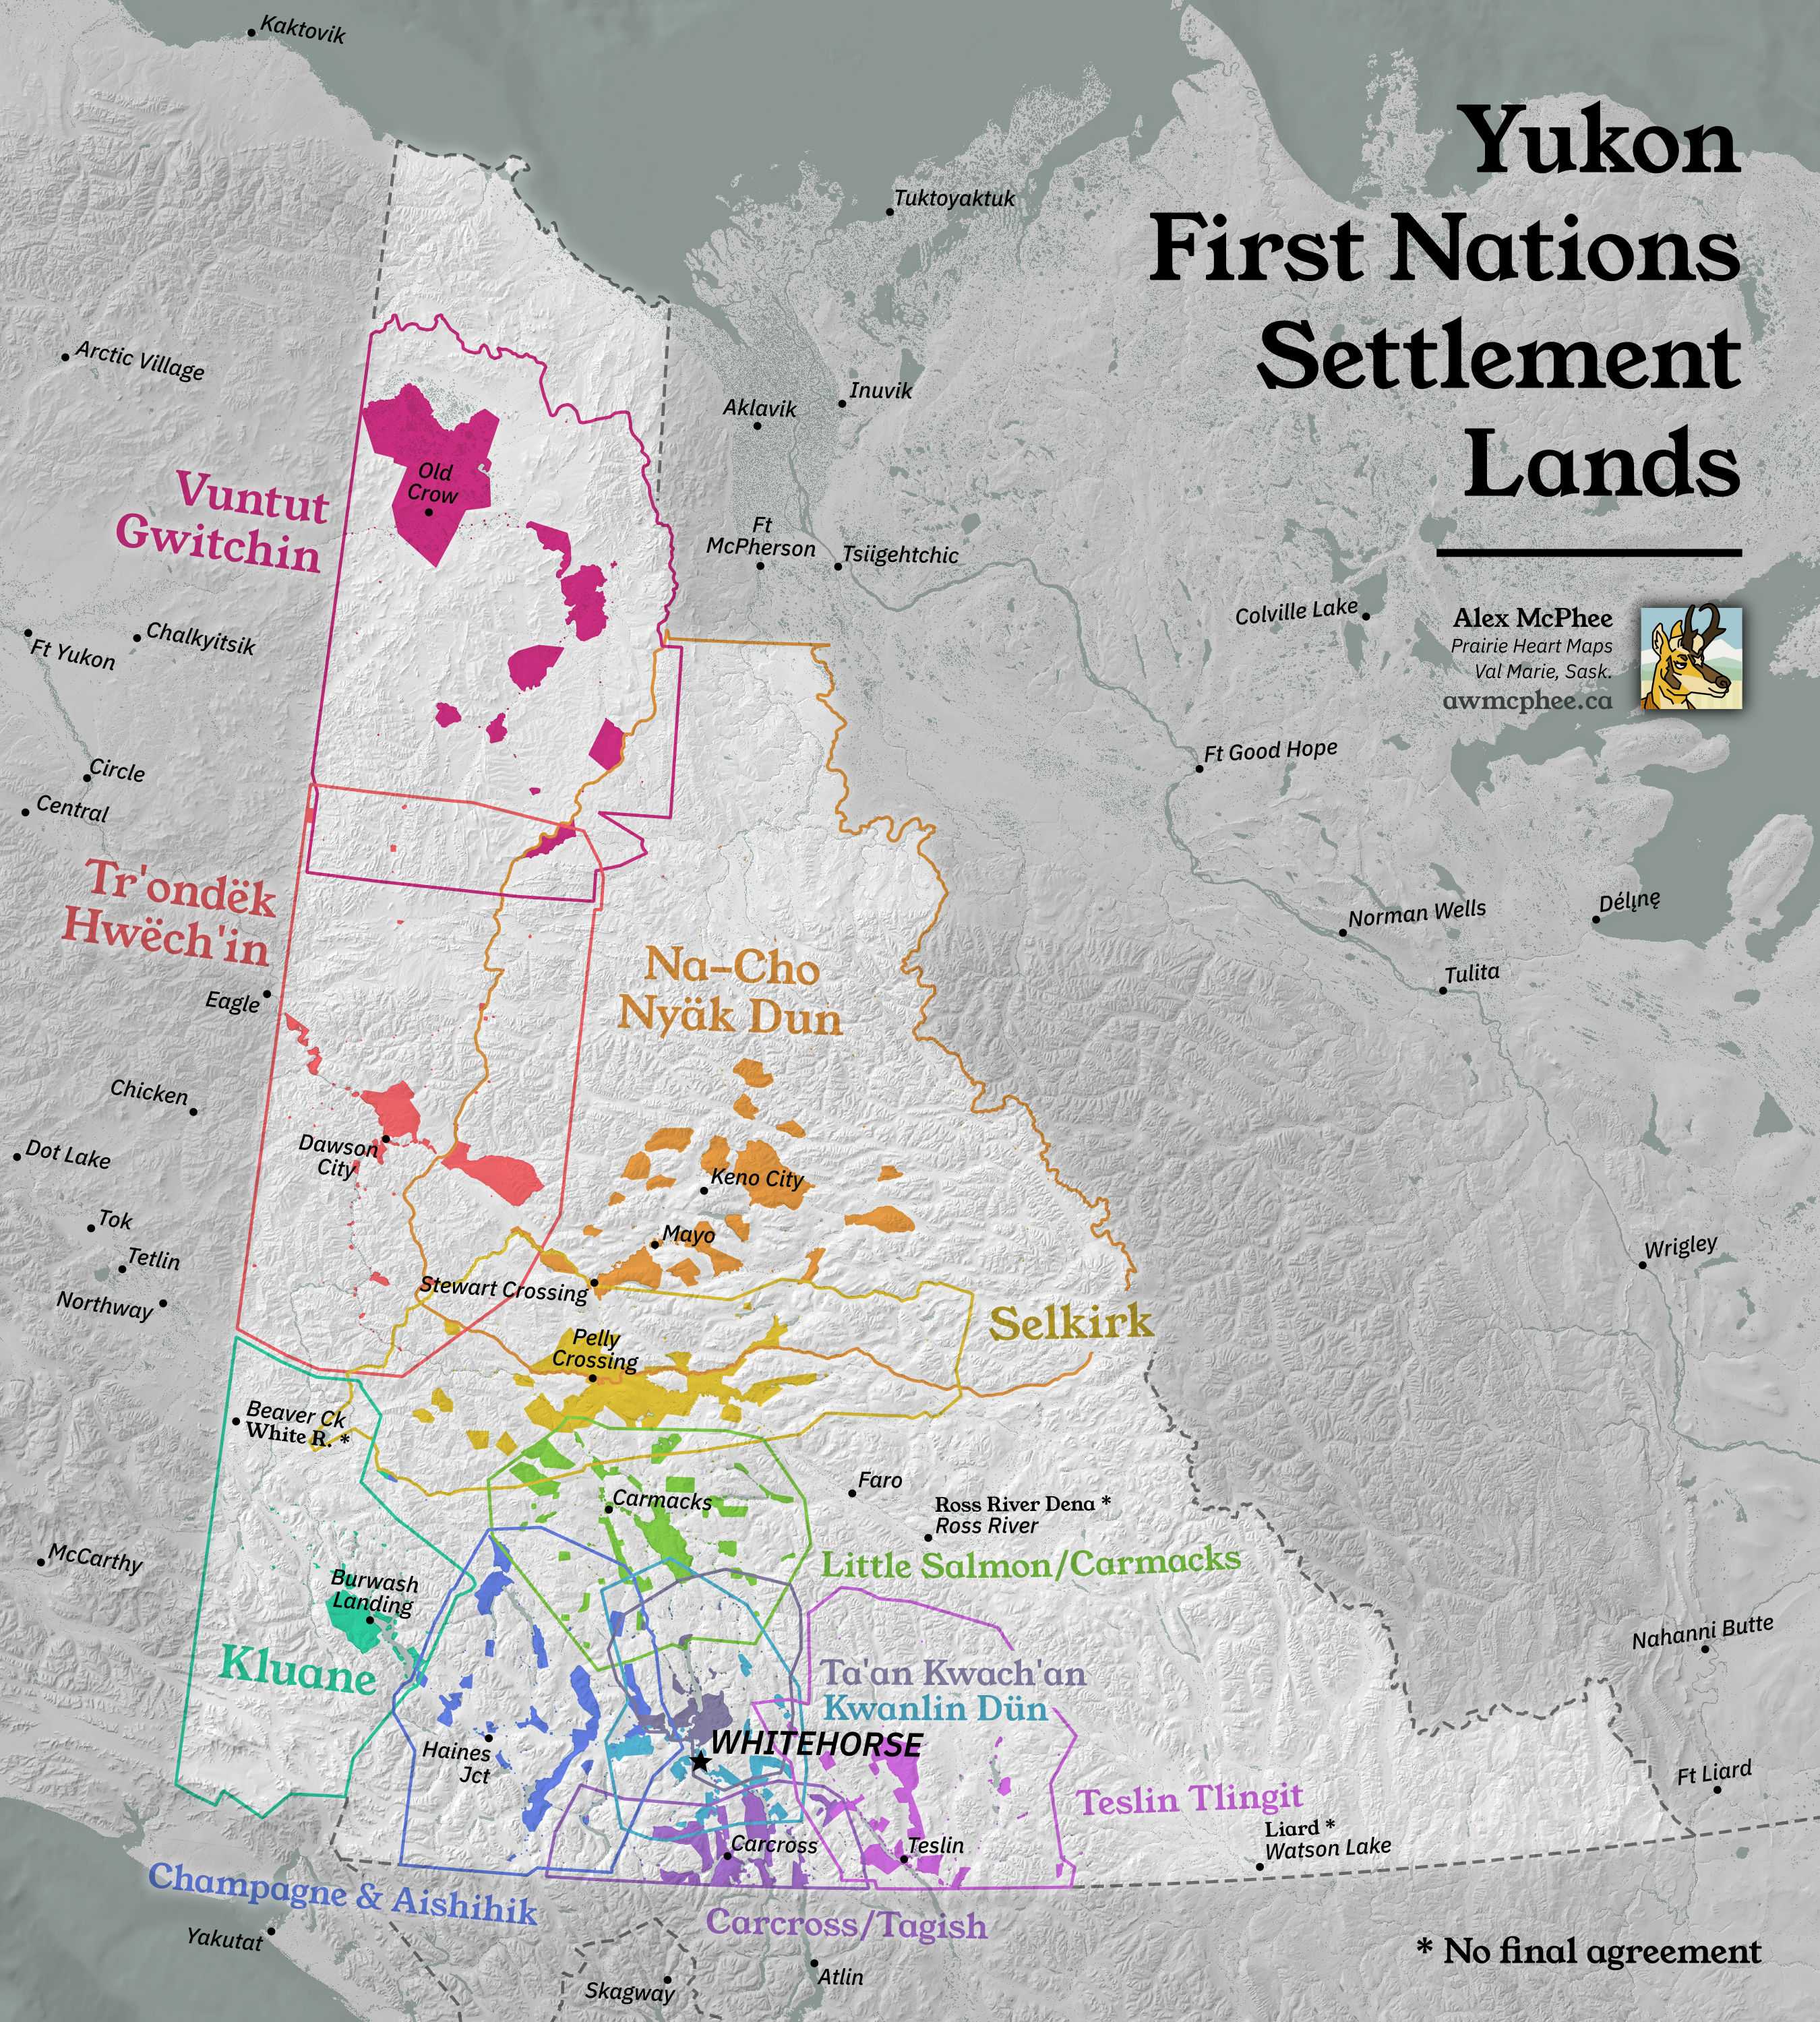 A map showing First Nations settlement lands in Yukon.